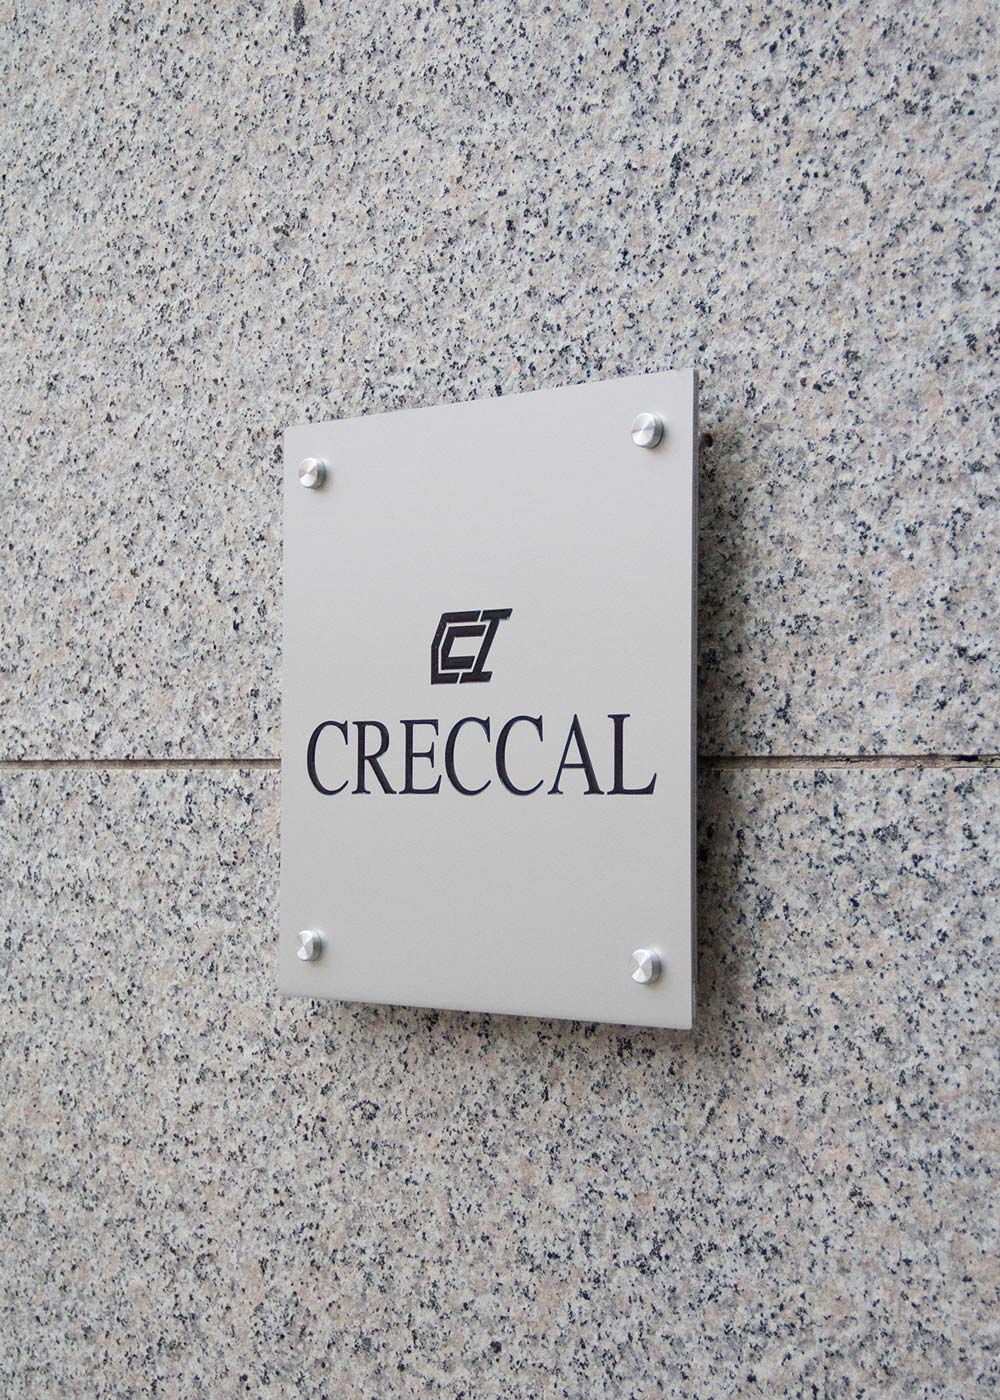 creccal_about